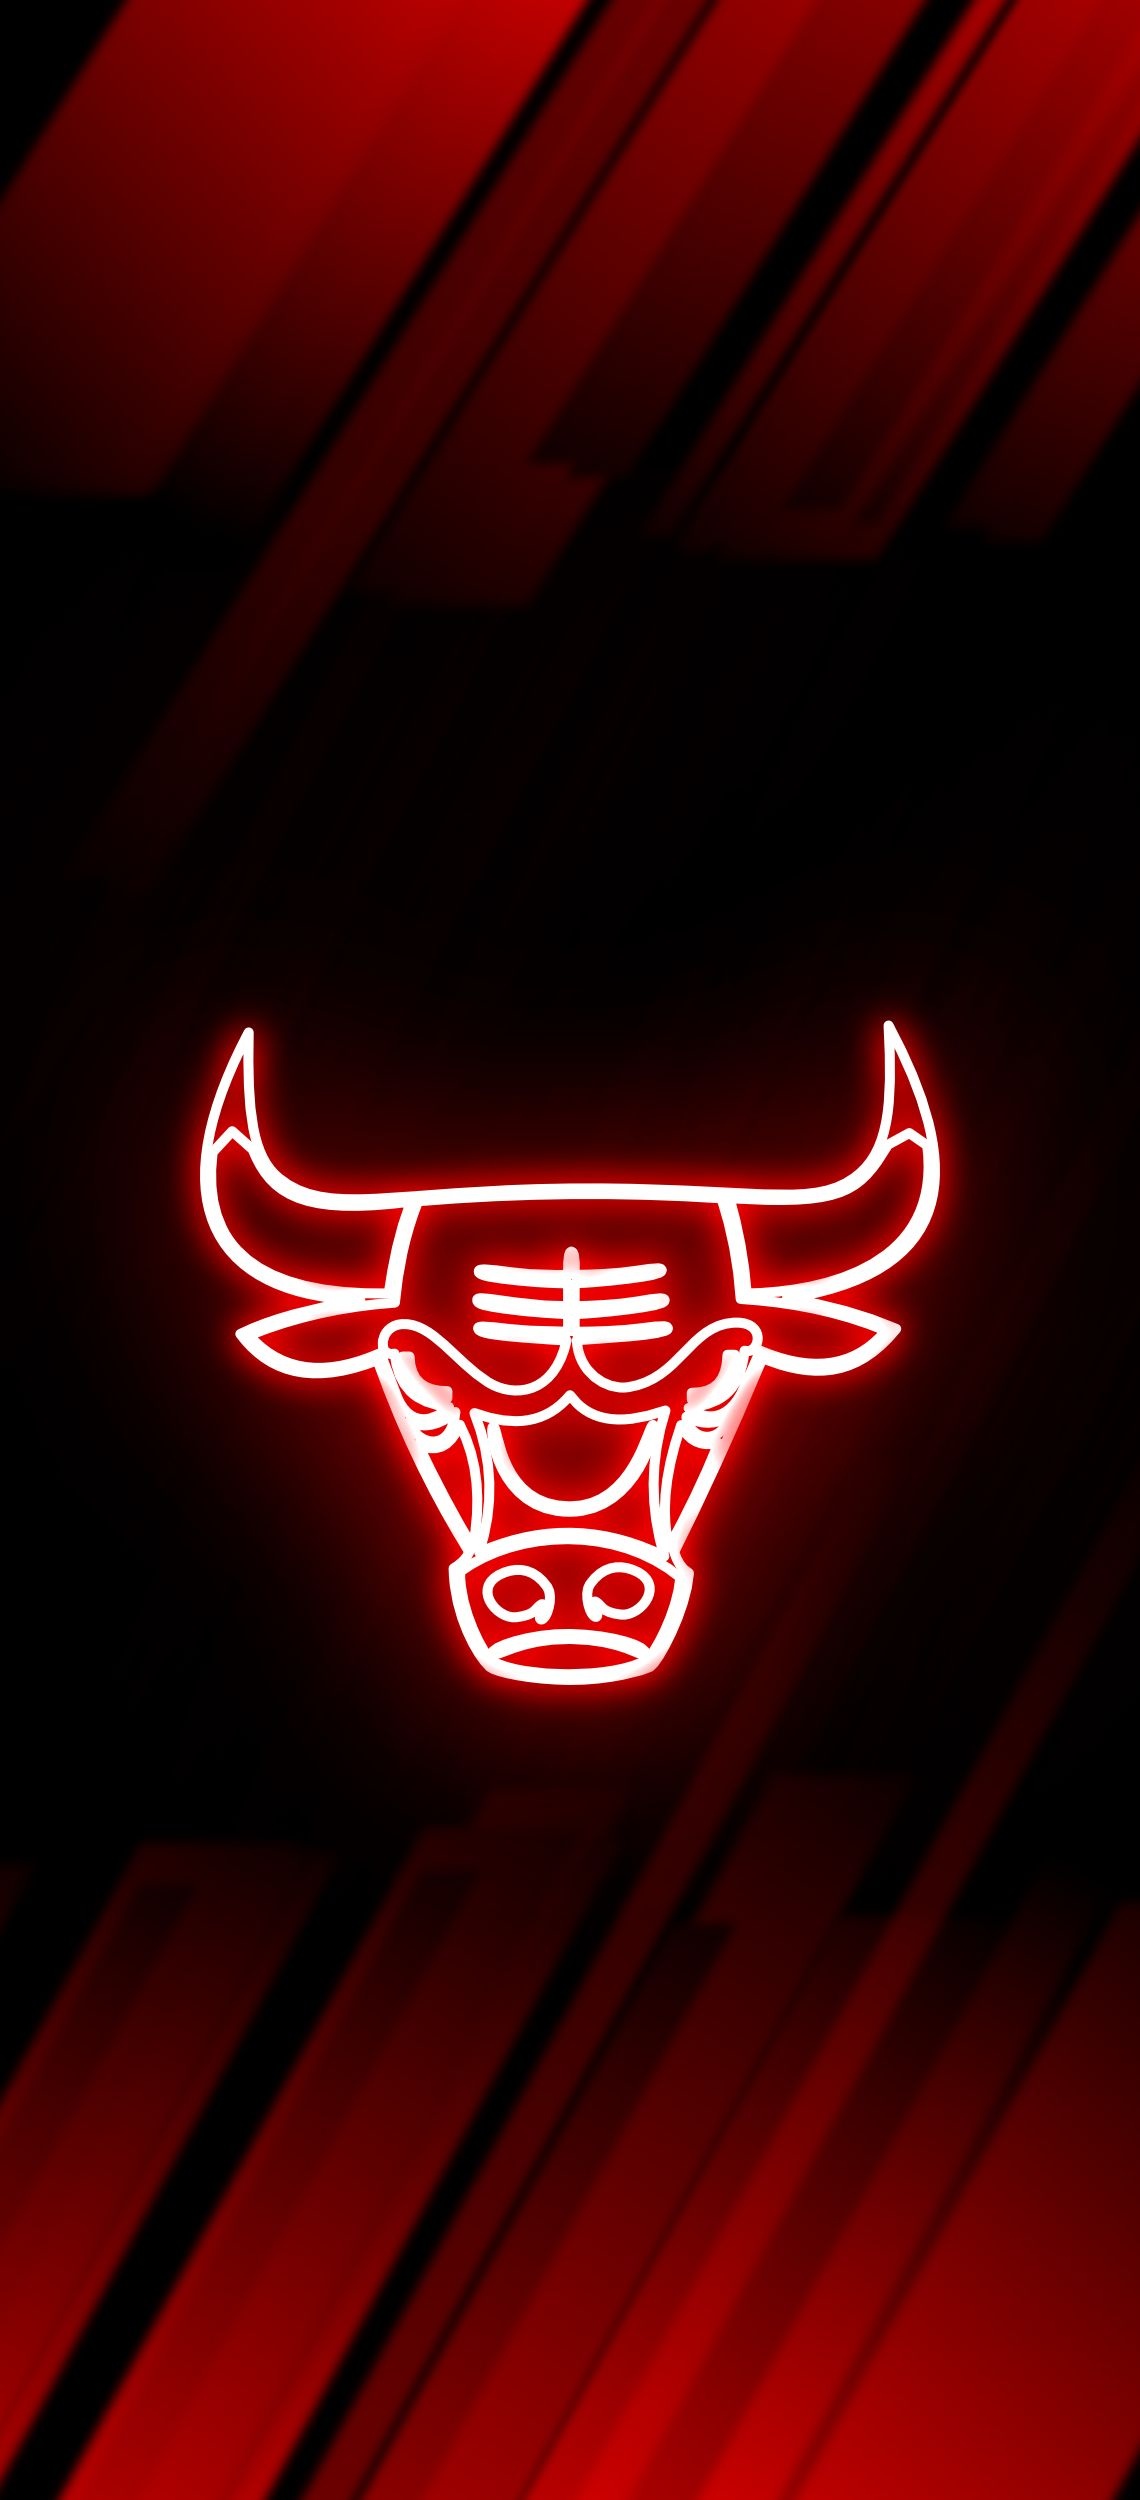 Chicago Bulls: Dick Klein was the team's only owner to ever play professional basketball. 1140x2500 HD Wallpaper.